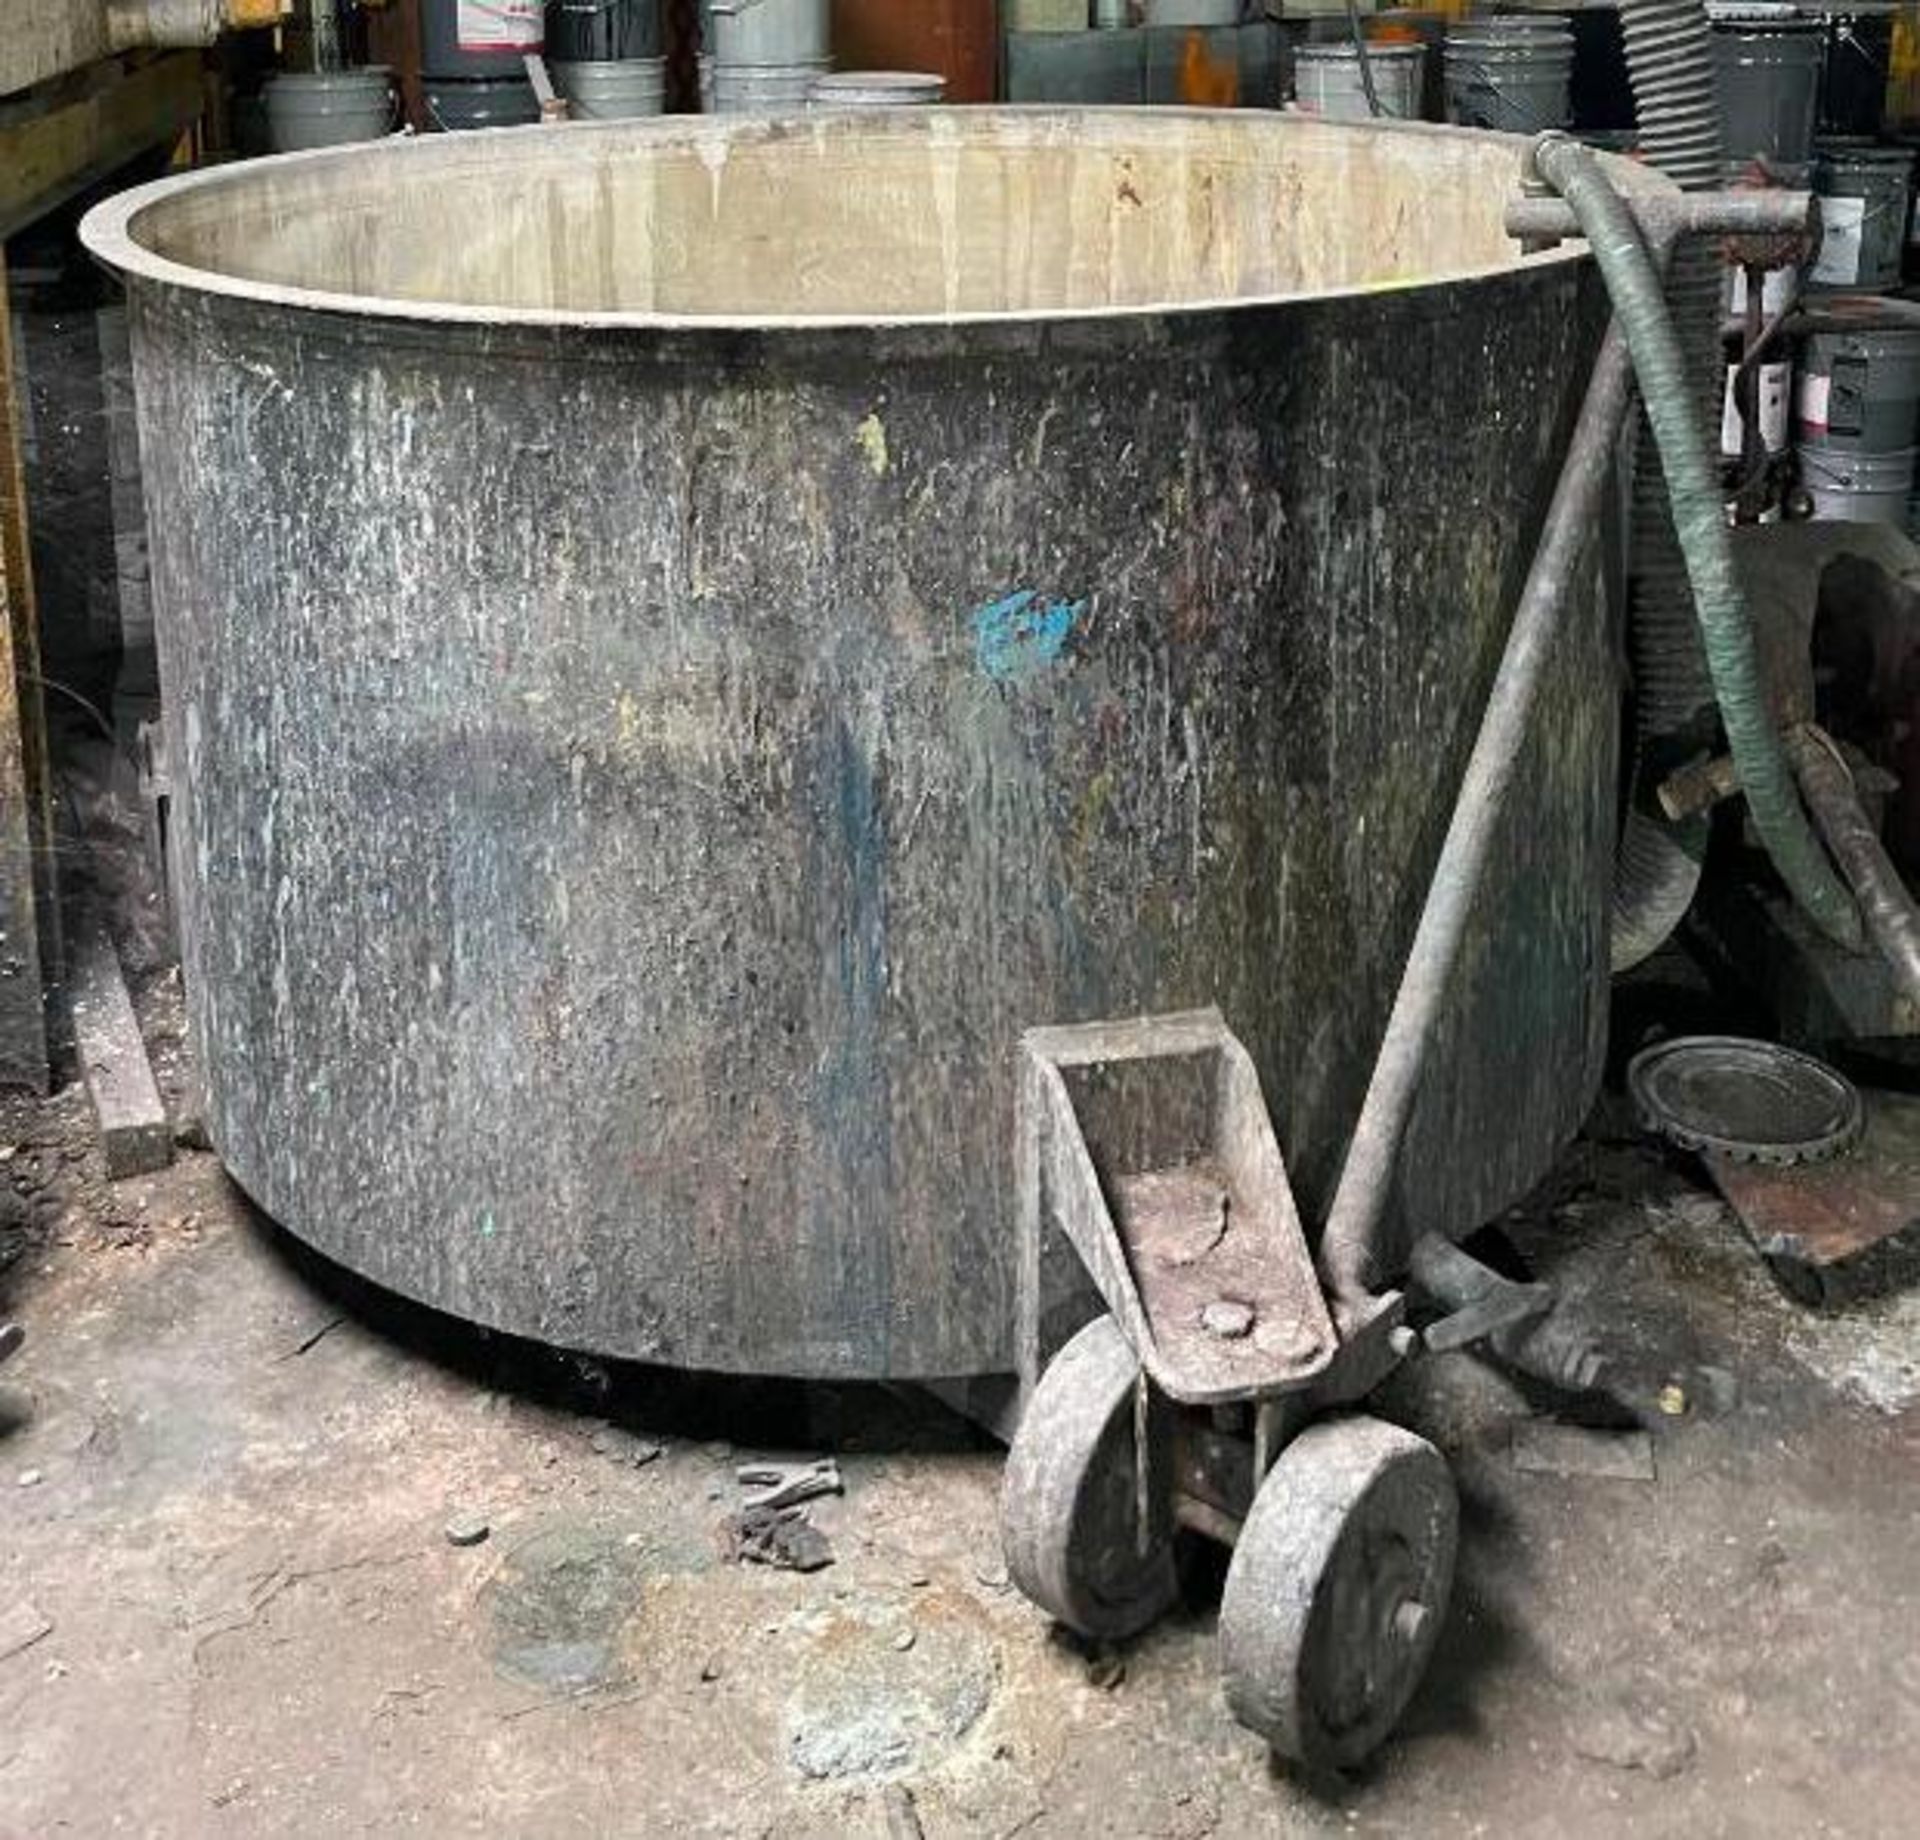 ROUND PROCESS TANK ON CASTERS SIZE: 84"X48"T LOCATION: MIXER ROOM QTY: 1